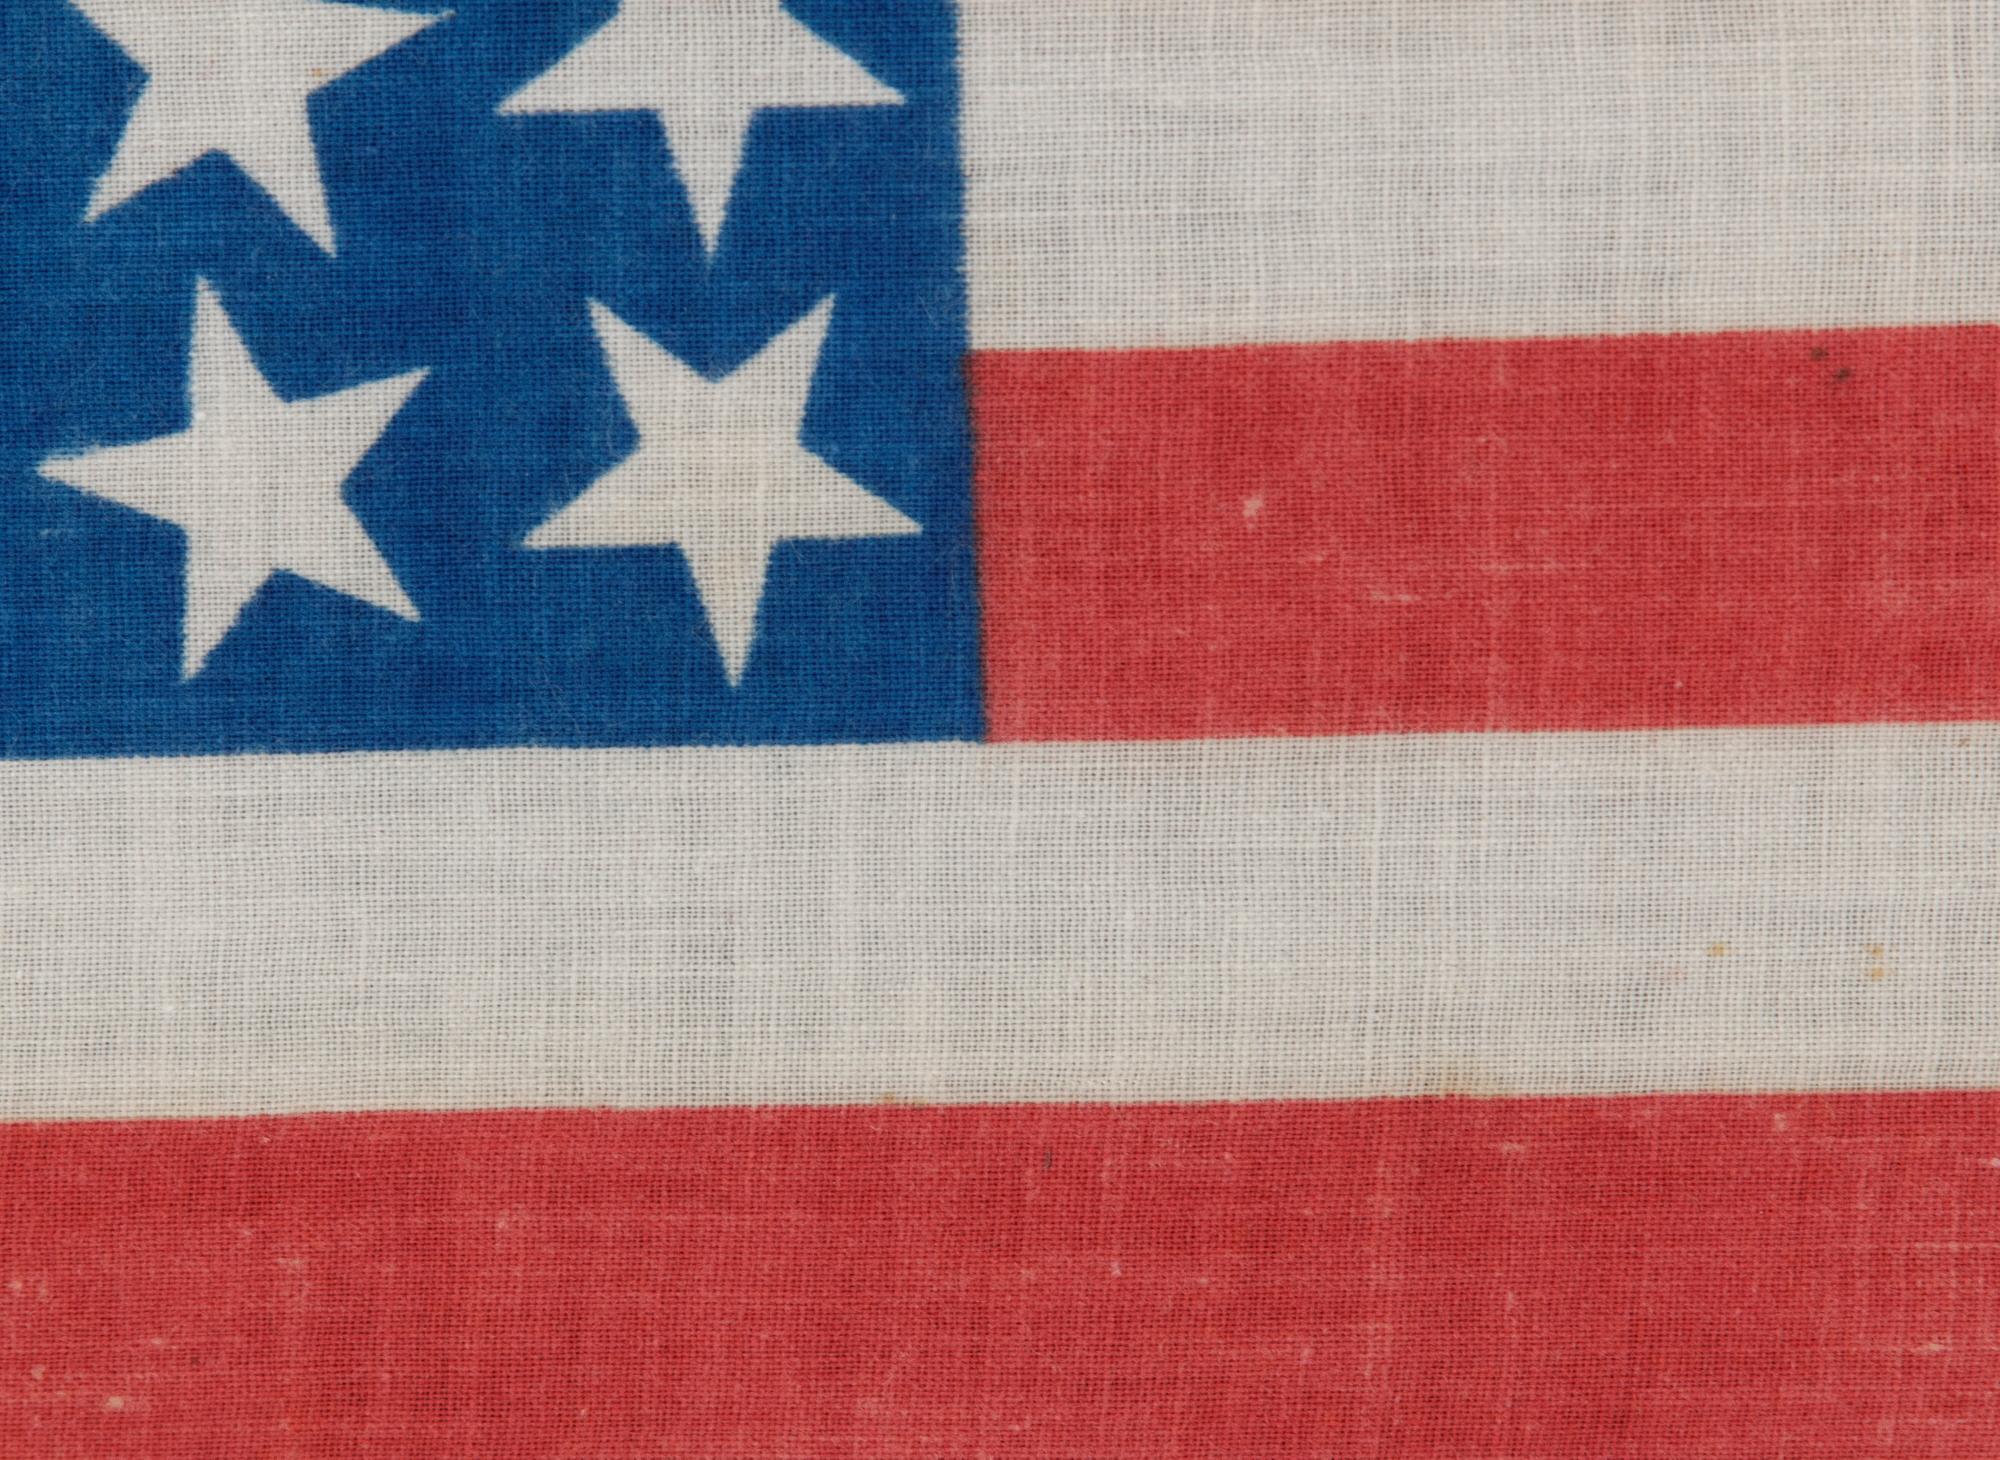 38 Star Antique American Parade Flag, Colorado Statehood, ca 1876-1889 In Good Condition For Sale In York County, PA